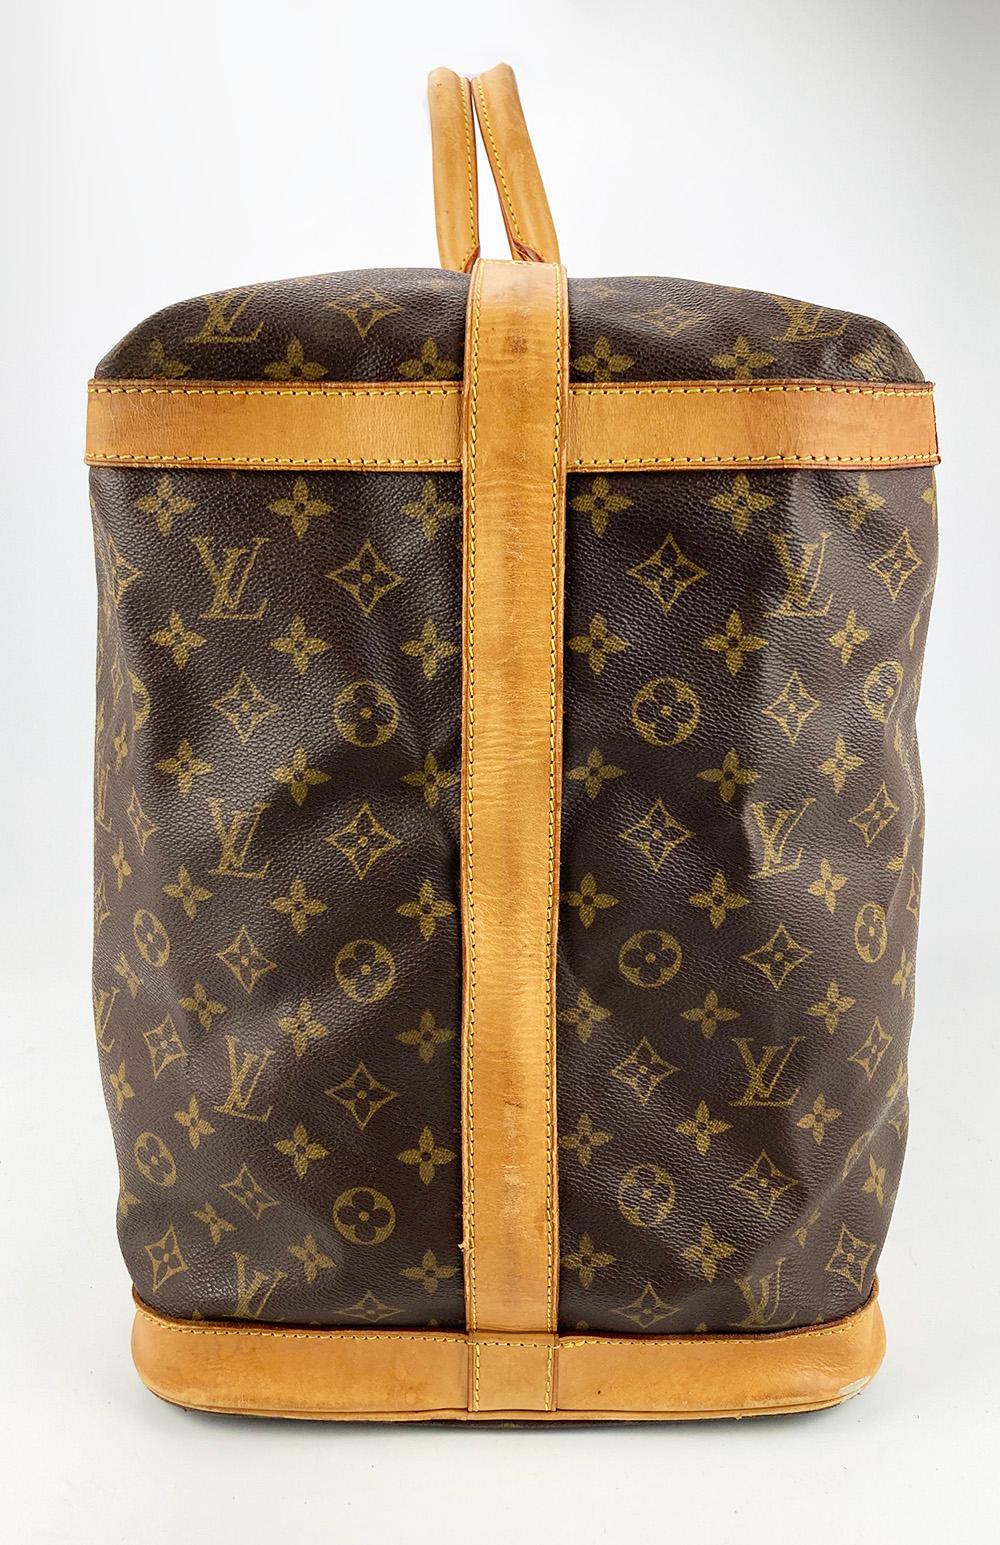 Vintage Louis Vuitton Monogram Cruiser 45 Travel Tote in fair condition. Signature monogram canvas exterior trimmed with tan leather and golden brass hardware. This is a rare vintage design from Louis Vuitton. It's not longer made or sold in stores.